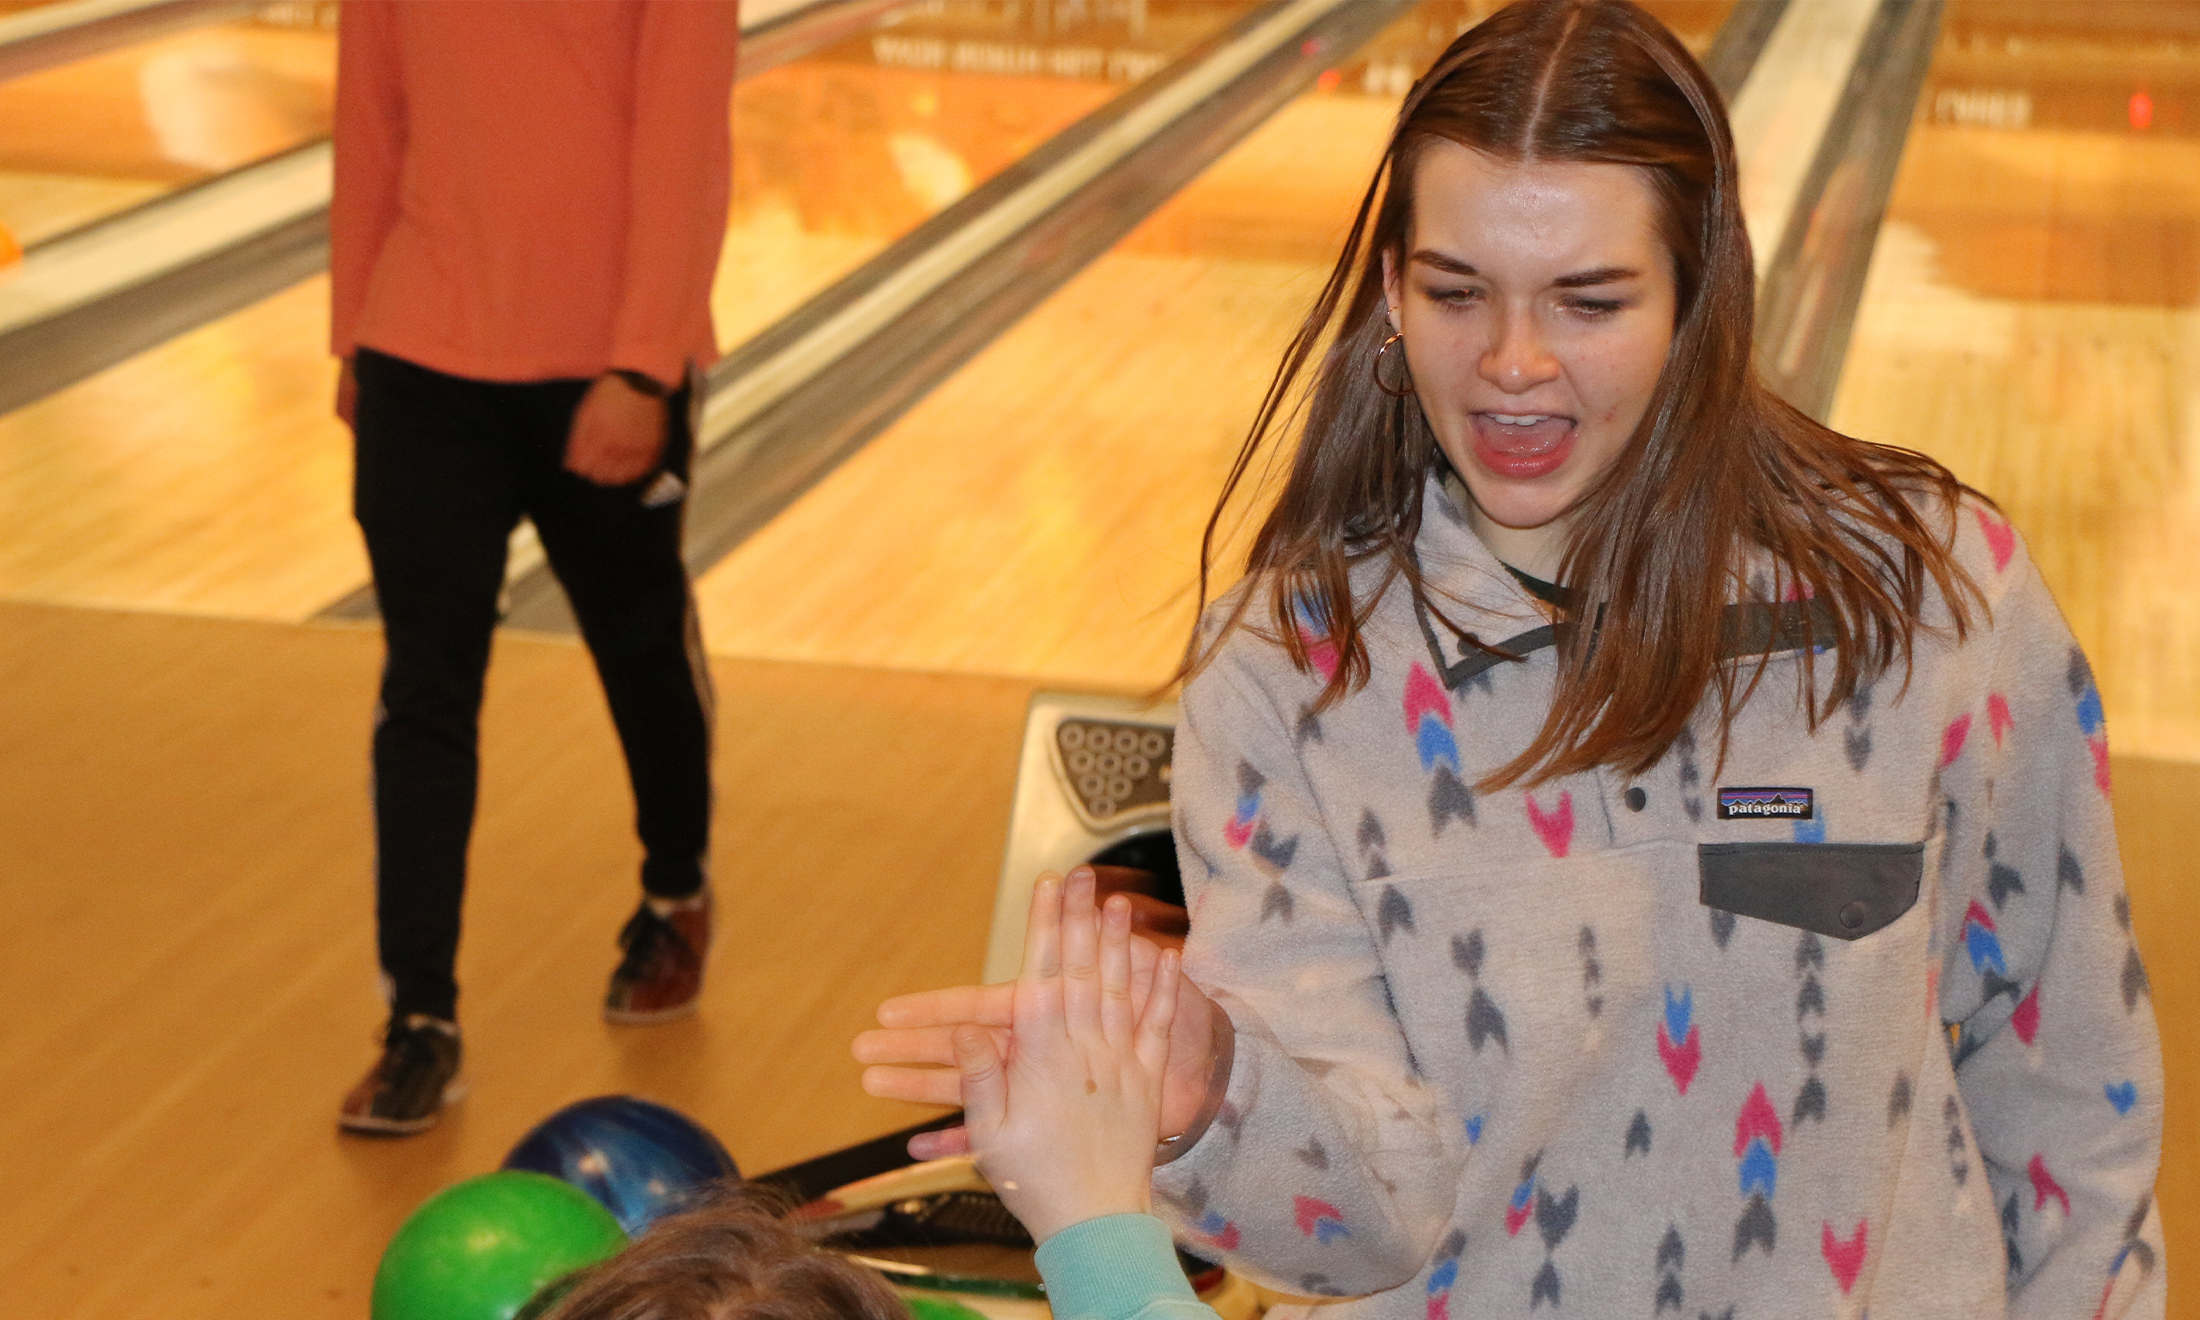 An image of OUWB students bowling and celebrating